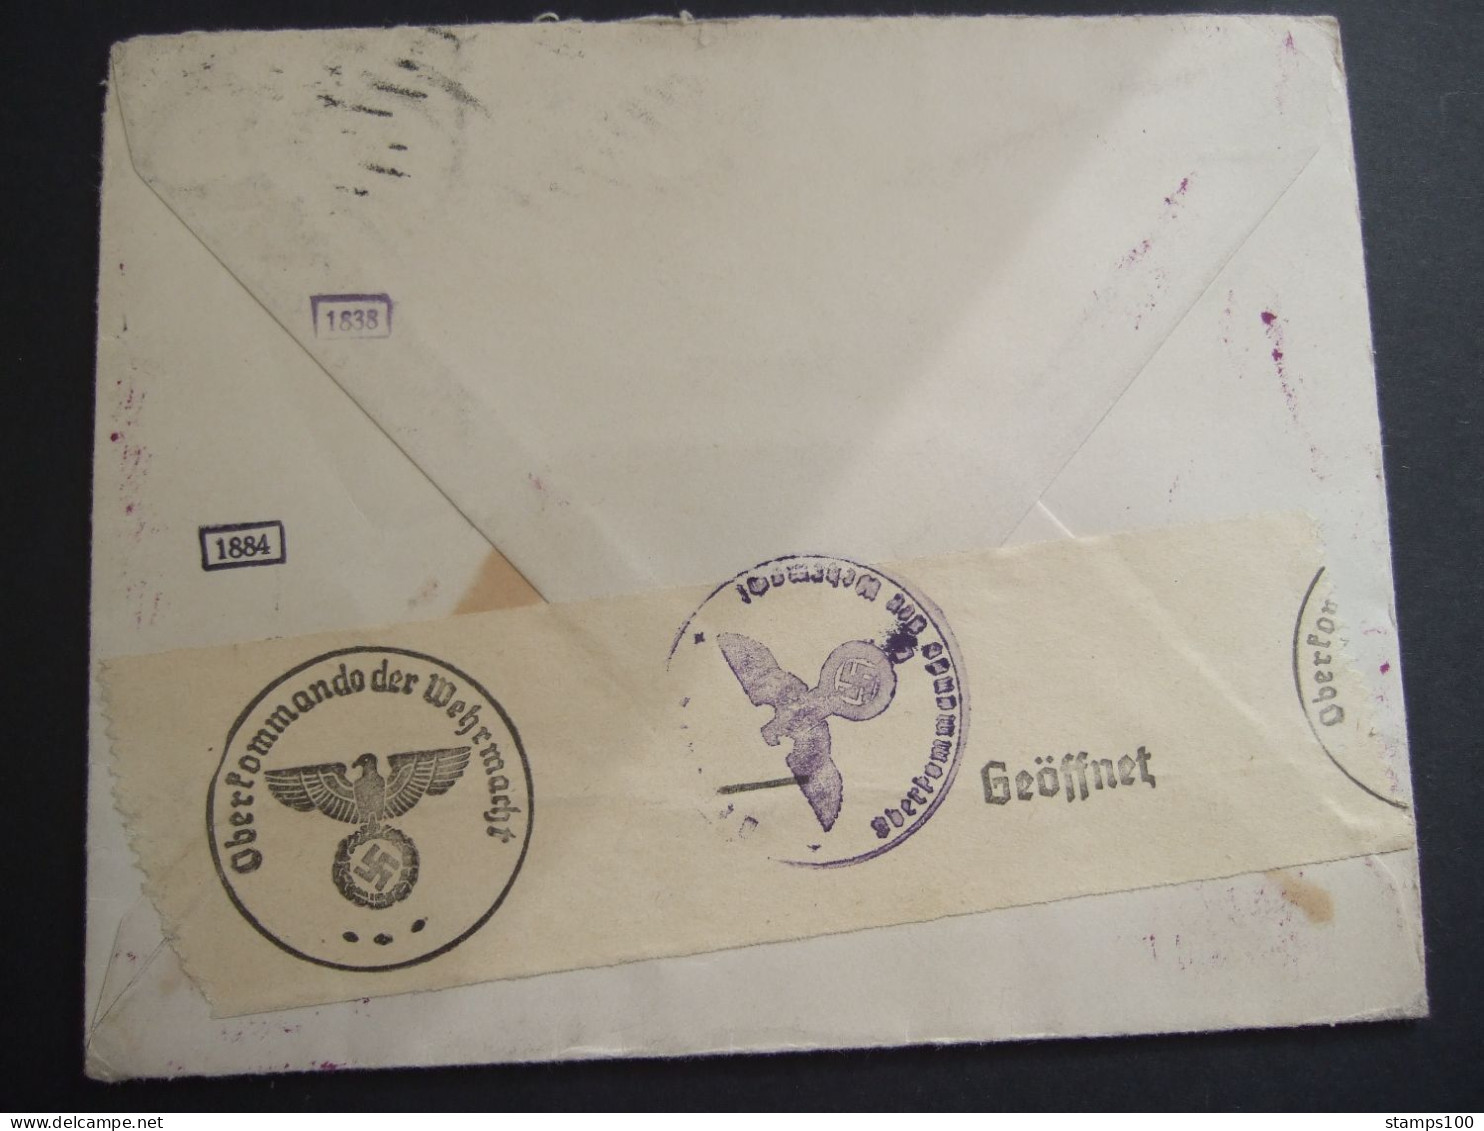 USA BY CLIPPER PLANE FROM RICHMOND TO HESSE NASSAU GERMANY. Letter Opened By OBERCOMMANDO DER WEHRMACHT (P42) - 1c. 1918-1940 Covers